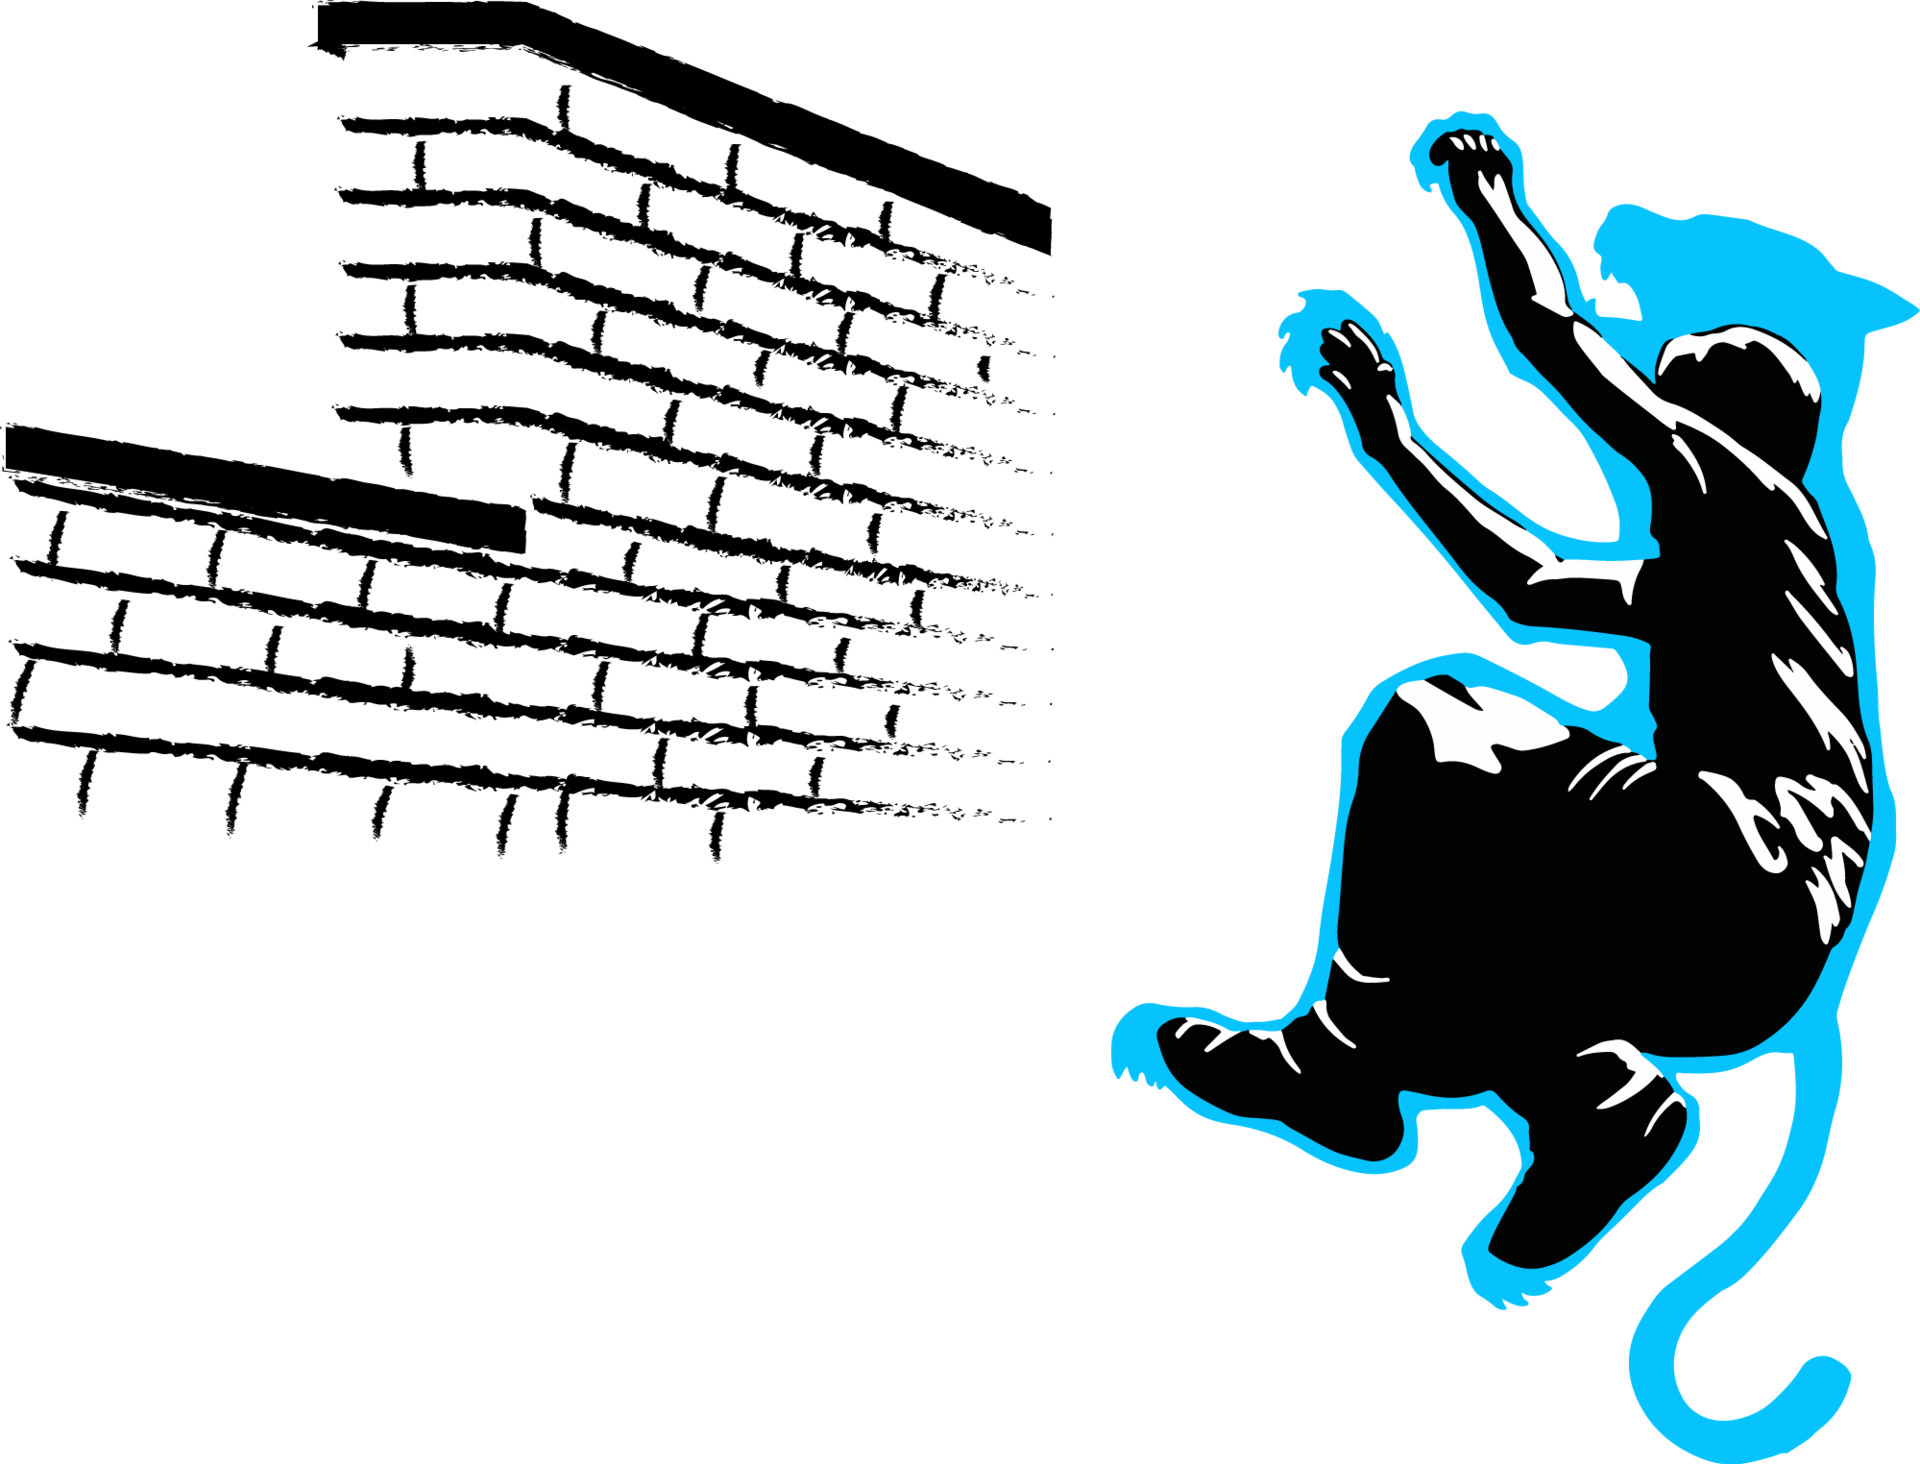 tim-cutts-cat-leap-spirit-non-standing-with-wall-3